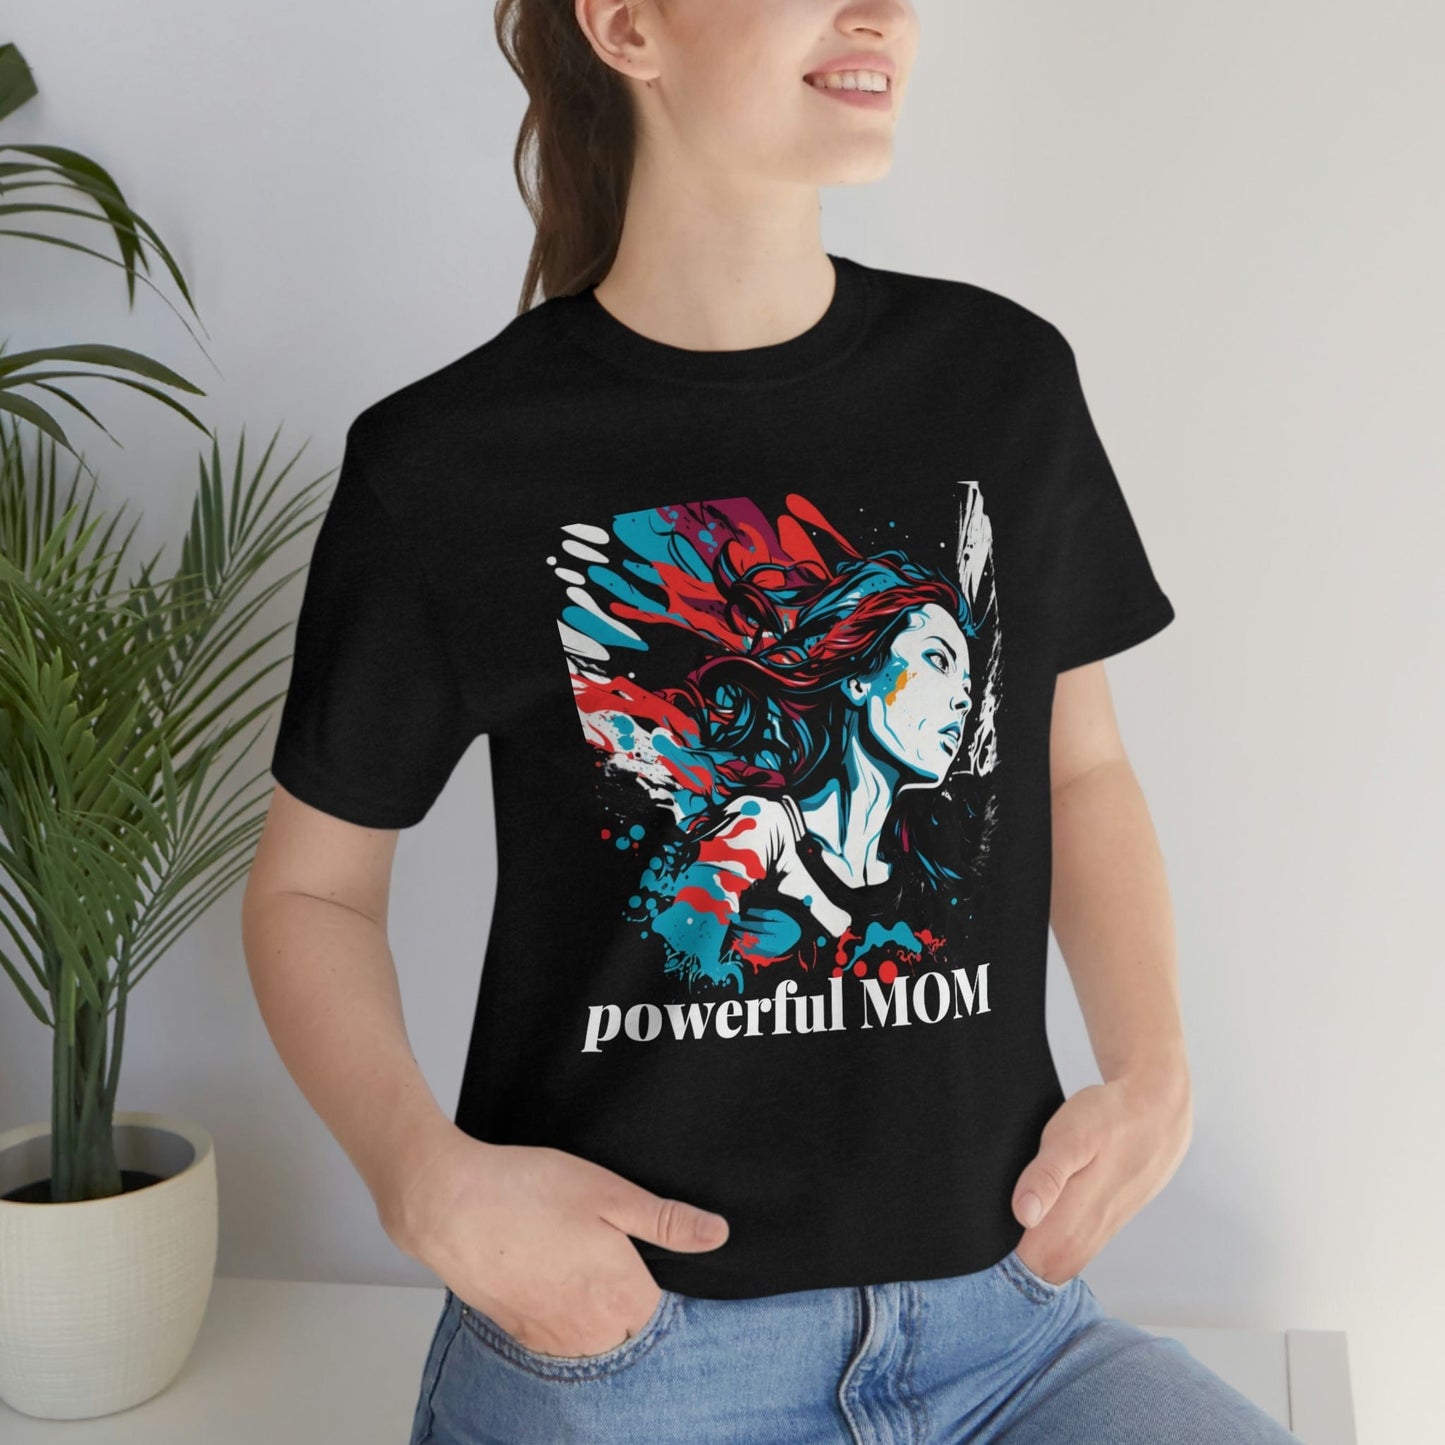 2023 Powerful Mom Feminist AF - Funny Feminism Tee for Women T-Shirt